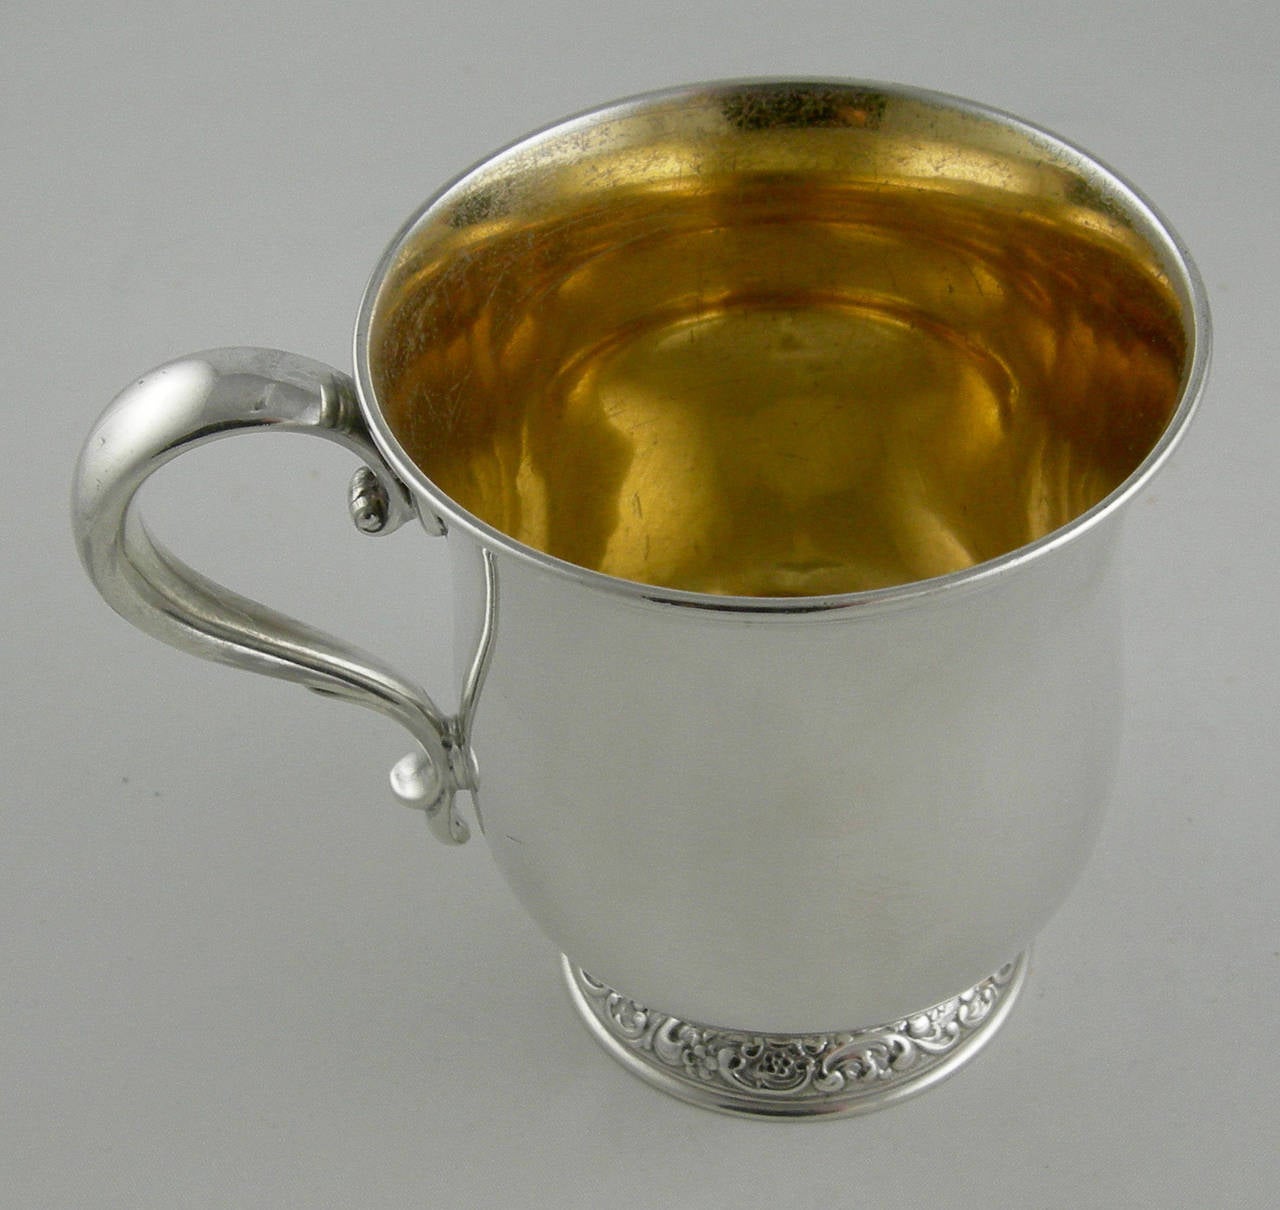 Tiffany & Co. Sterling baby cup
Makers serial date 13256 (1897).

Vermeil (gold wash) inside.
No monogram.

Dimensions: Weight: 5.025 Troy ounces.